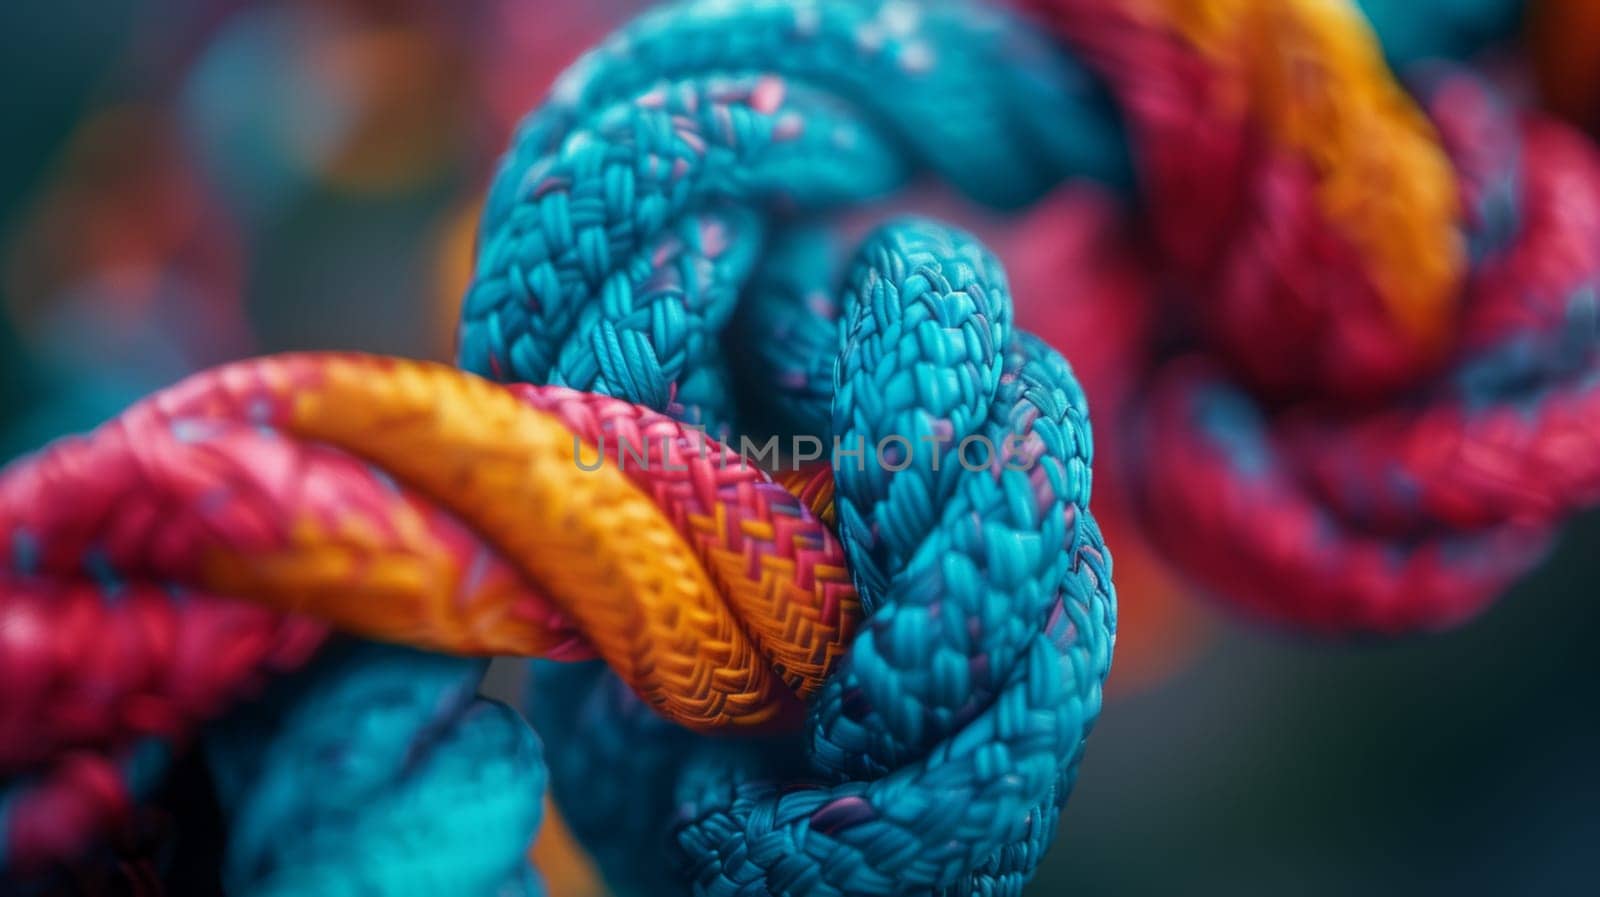 A detailed close-up shot capturing the intricate pattern of a tightly woven knot in a thick rope by but_photo